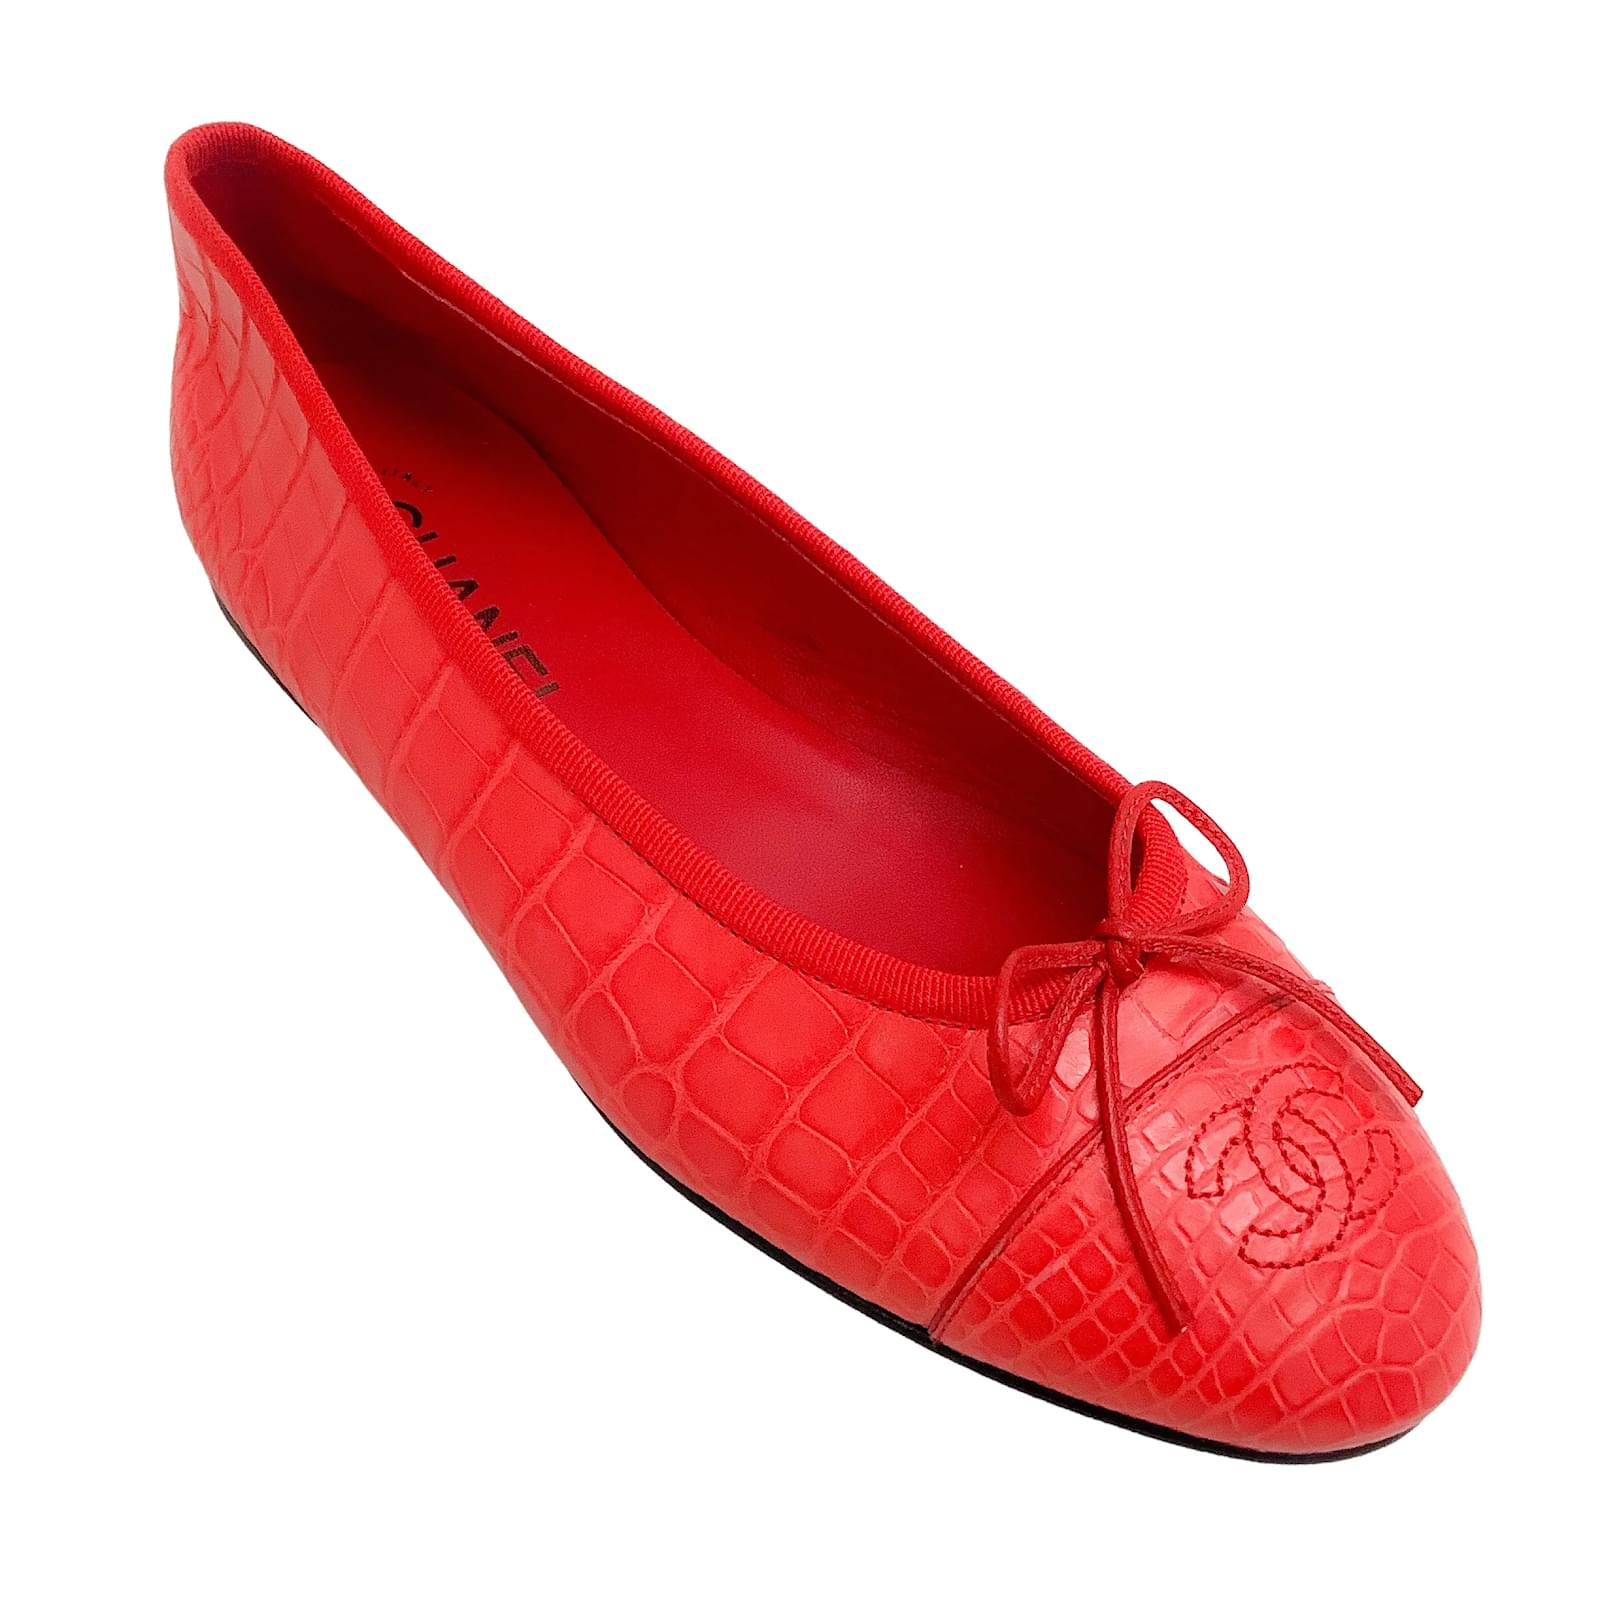 Ballet Flats Chanel Chanel Coral Crocodile Leather Ballet Flats Size 8 US